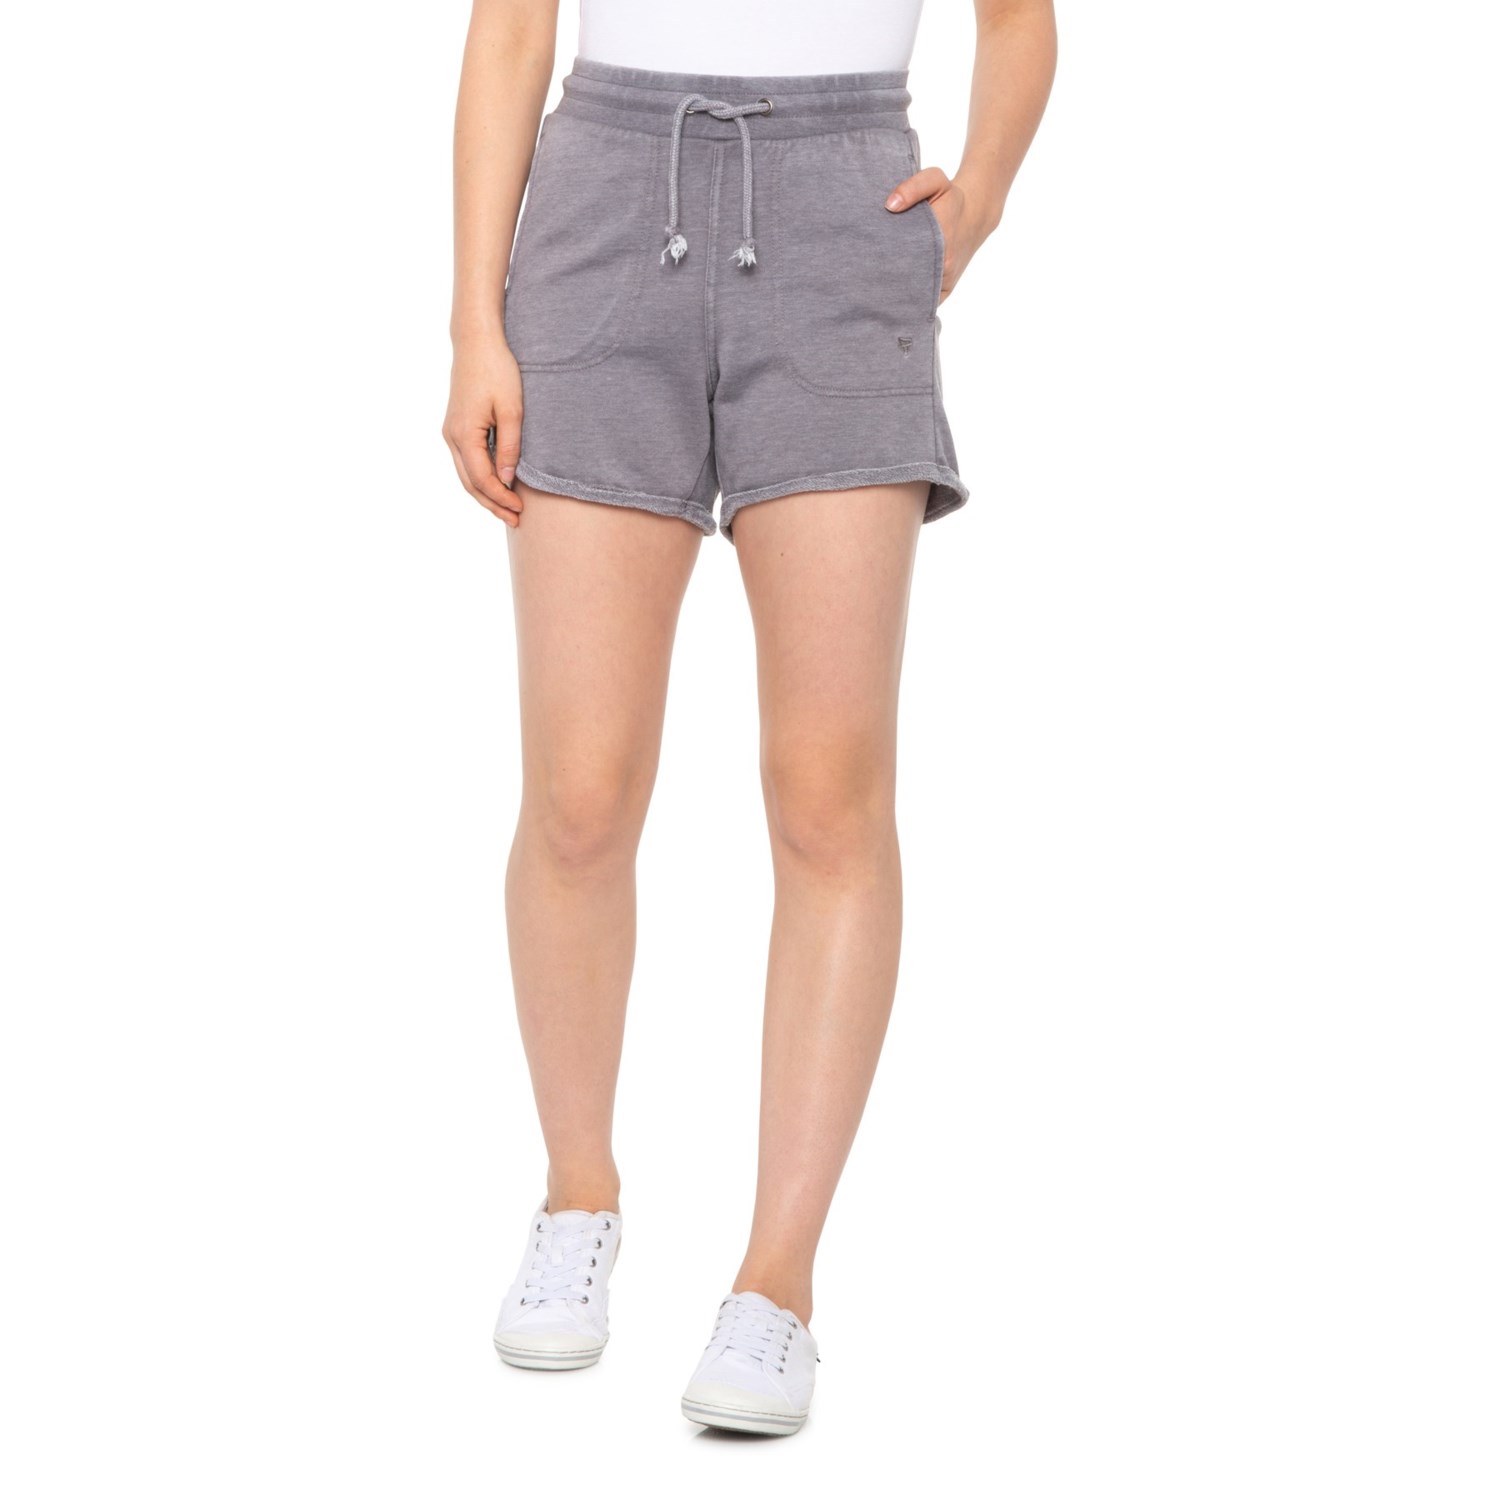 LIV OUTDOOR Amara Terry Knit Shorts (For Women) - Save 57%